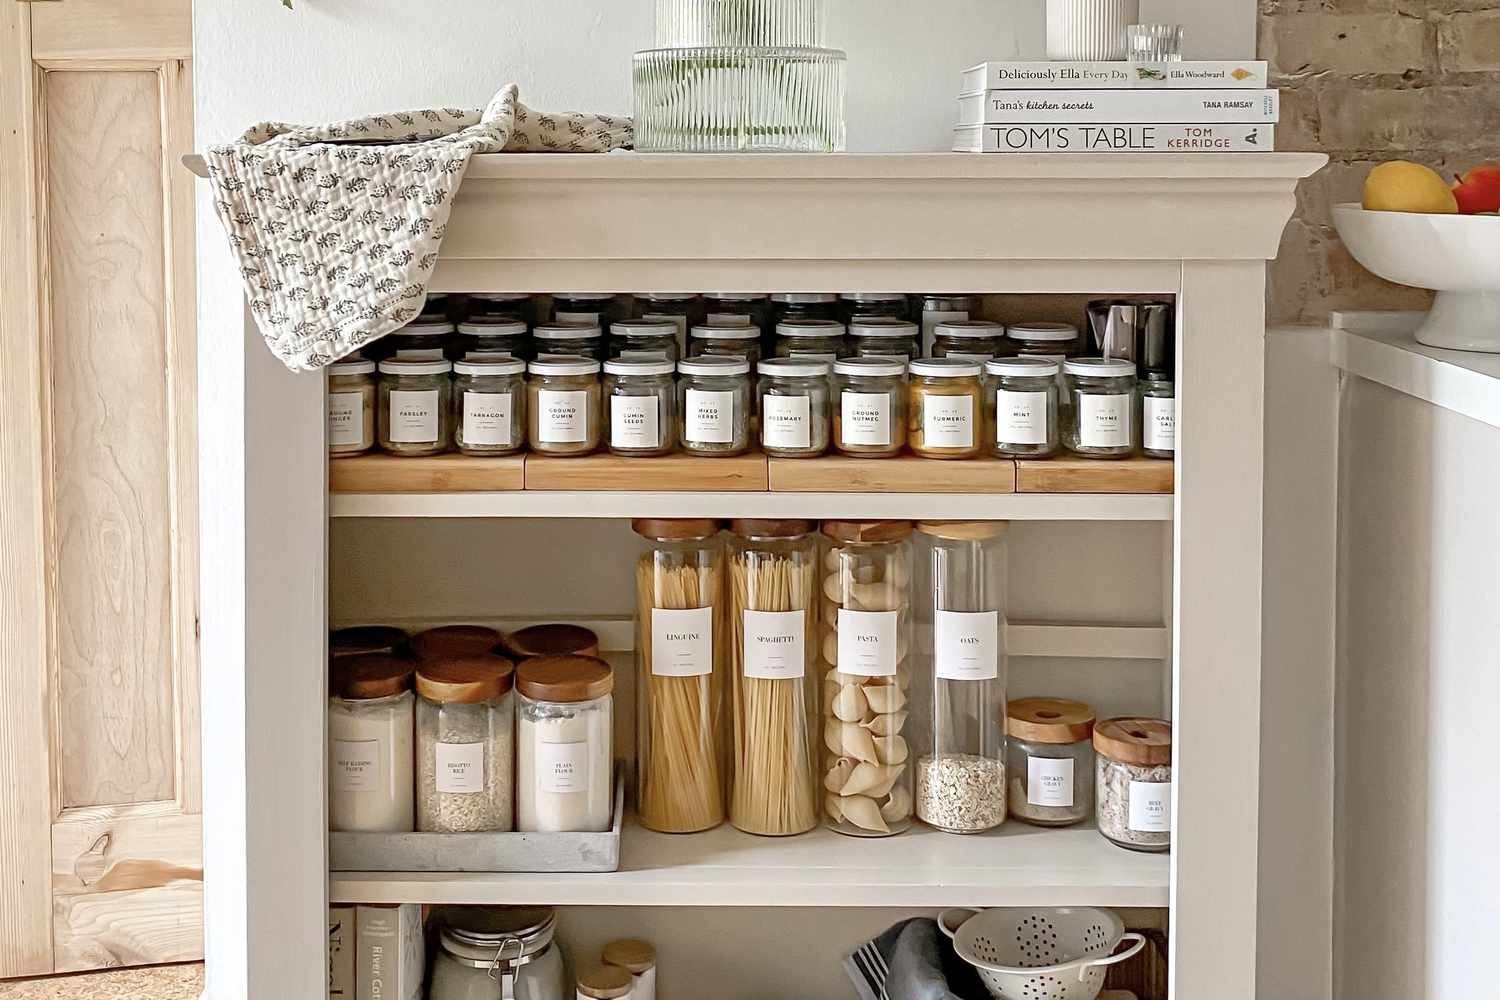 Adding a Spice Rack to An Existing Cabinet